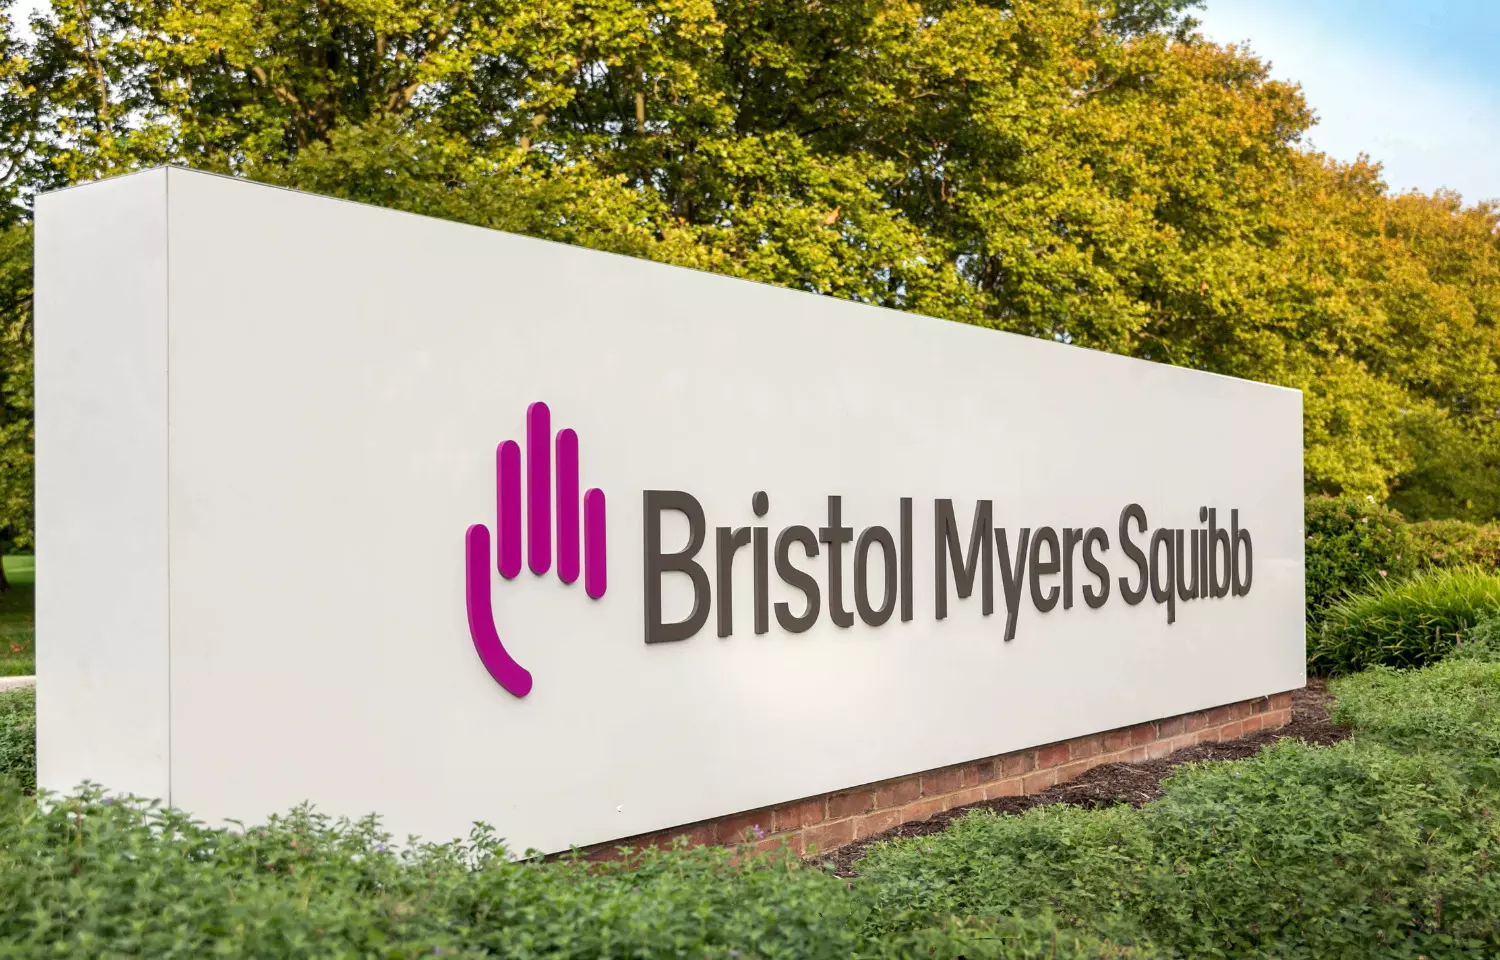 Bristol Myers Squibb to sell its East Syracuse facility to LOTTE